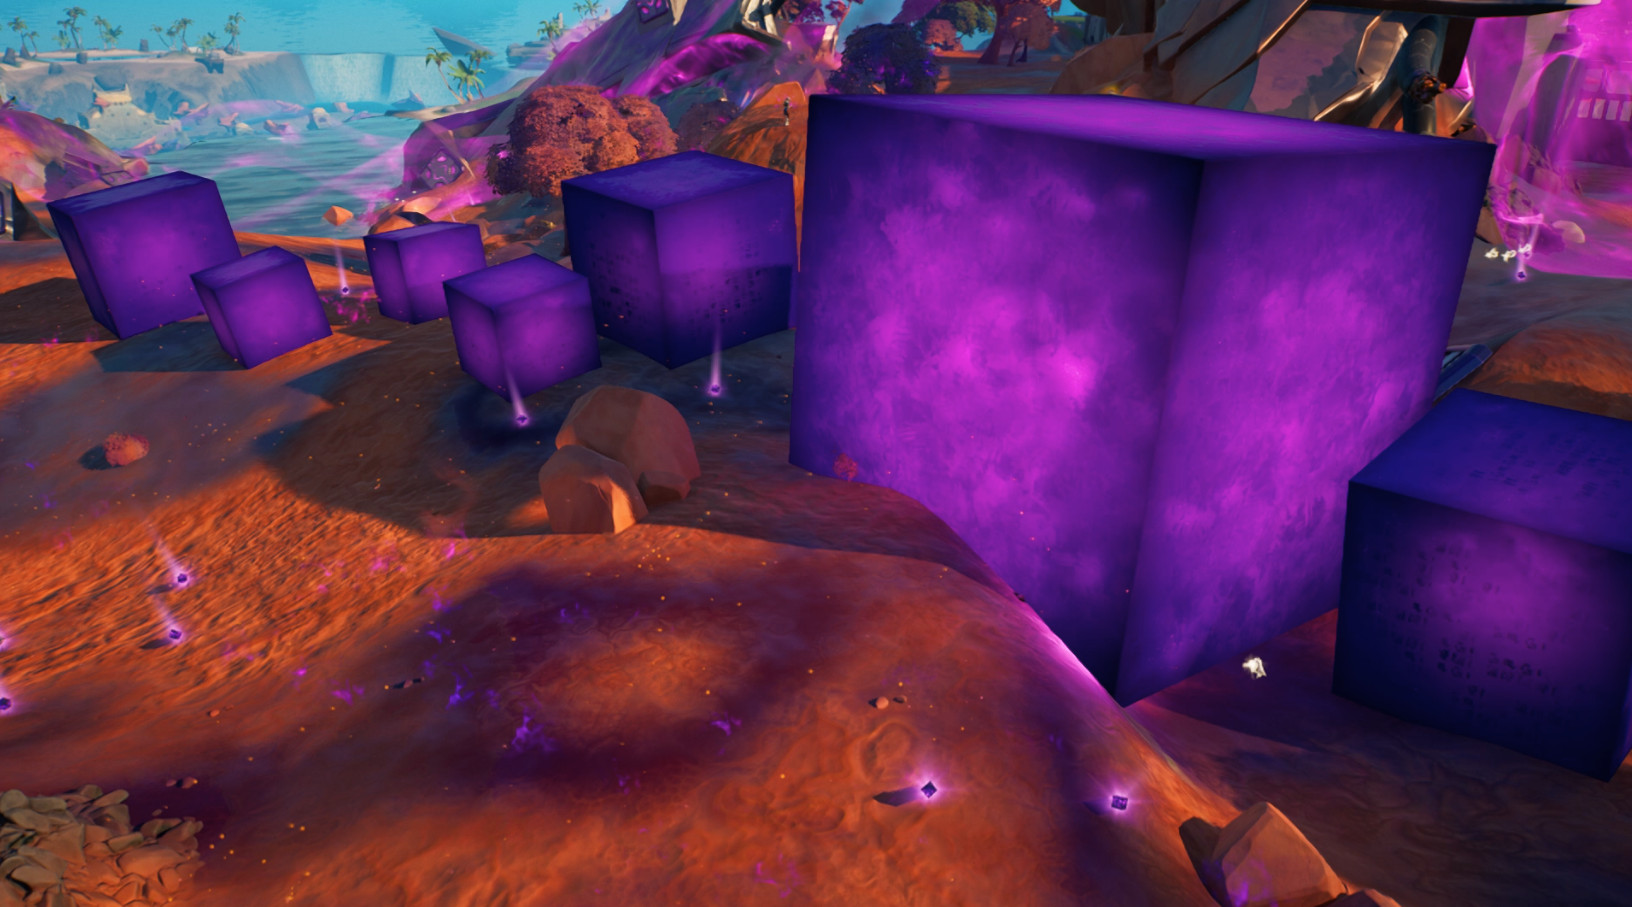 A new cube appeared at Steamy Stacks, and it's different from other Fortnite cubes  